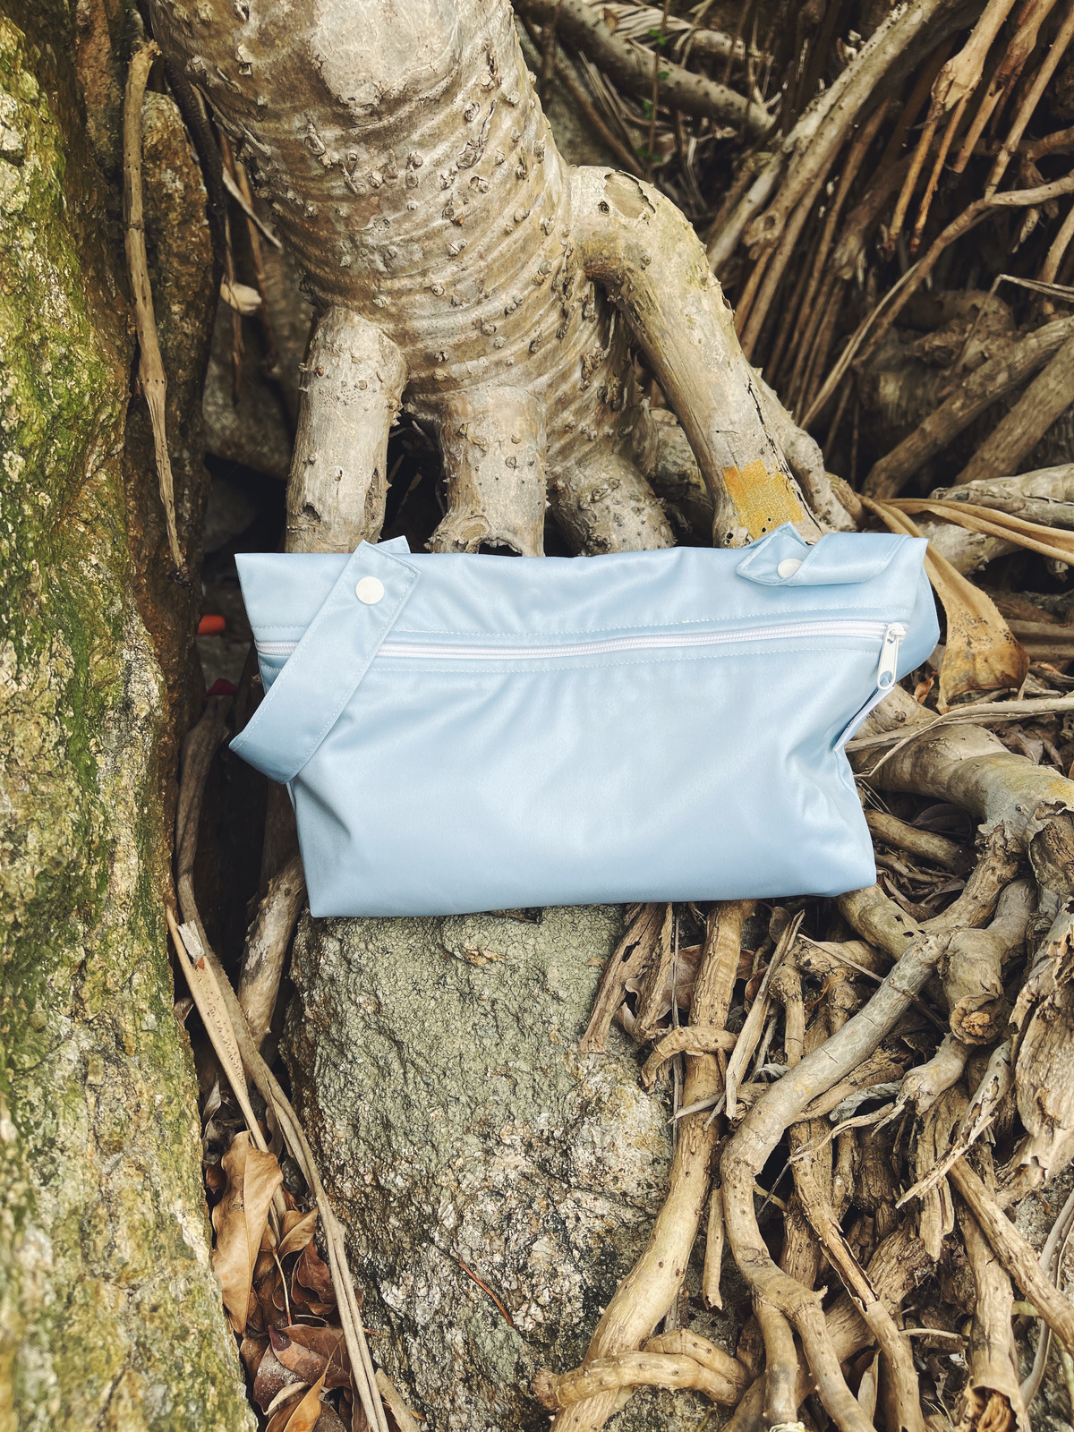 This Little Essentials double-lined, waterproof pouch is perfect for keeping your diaper bag or mommy/daddy bag organized! It’s the perfect size for all your little one’s little essentials that you need to access easily, whether it’s on a walk to the park, long-haul travel or cot-side and by your changing station.